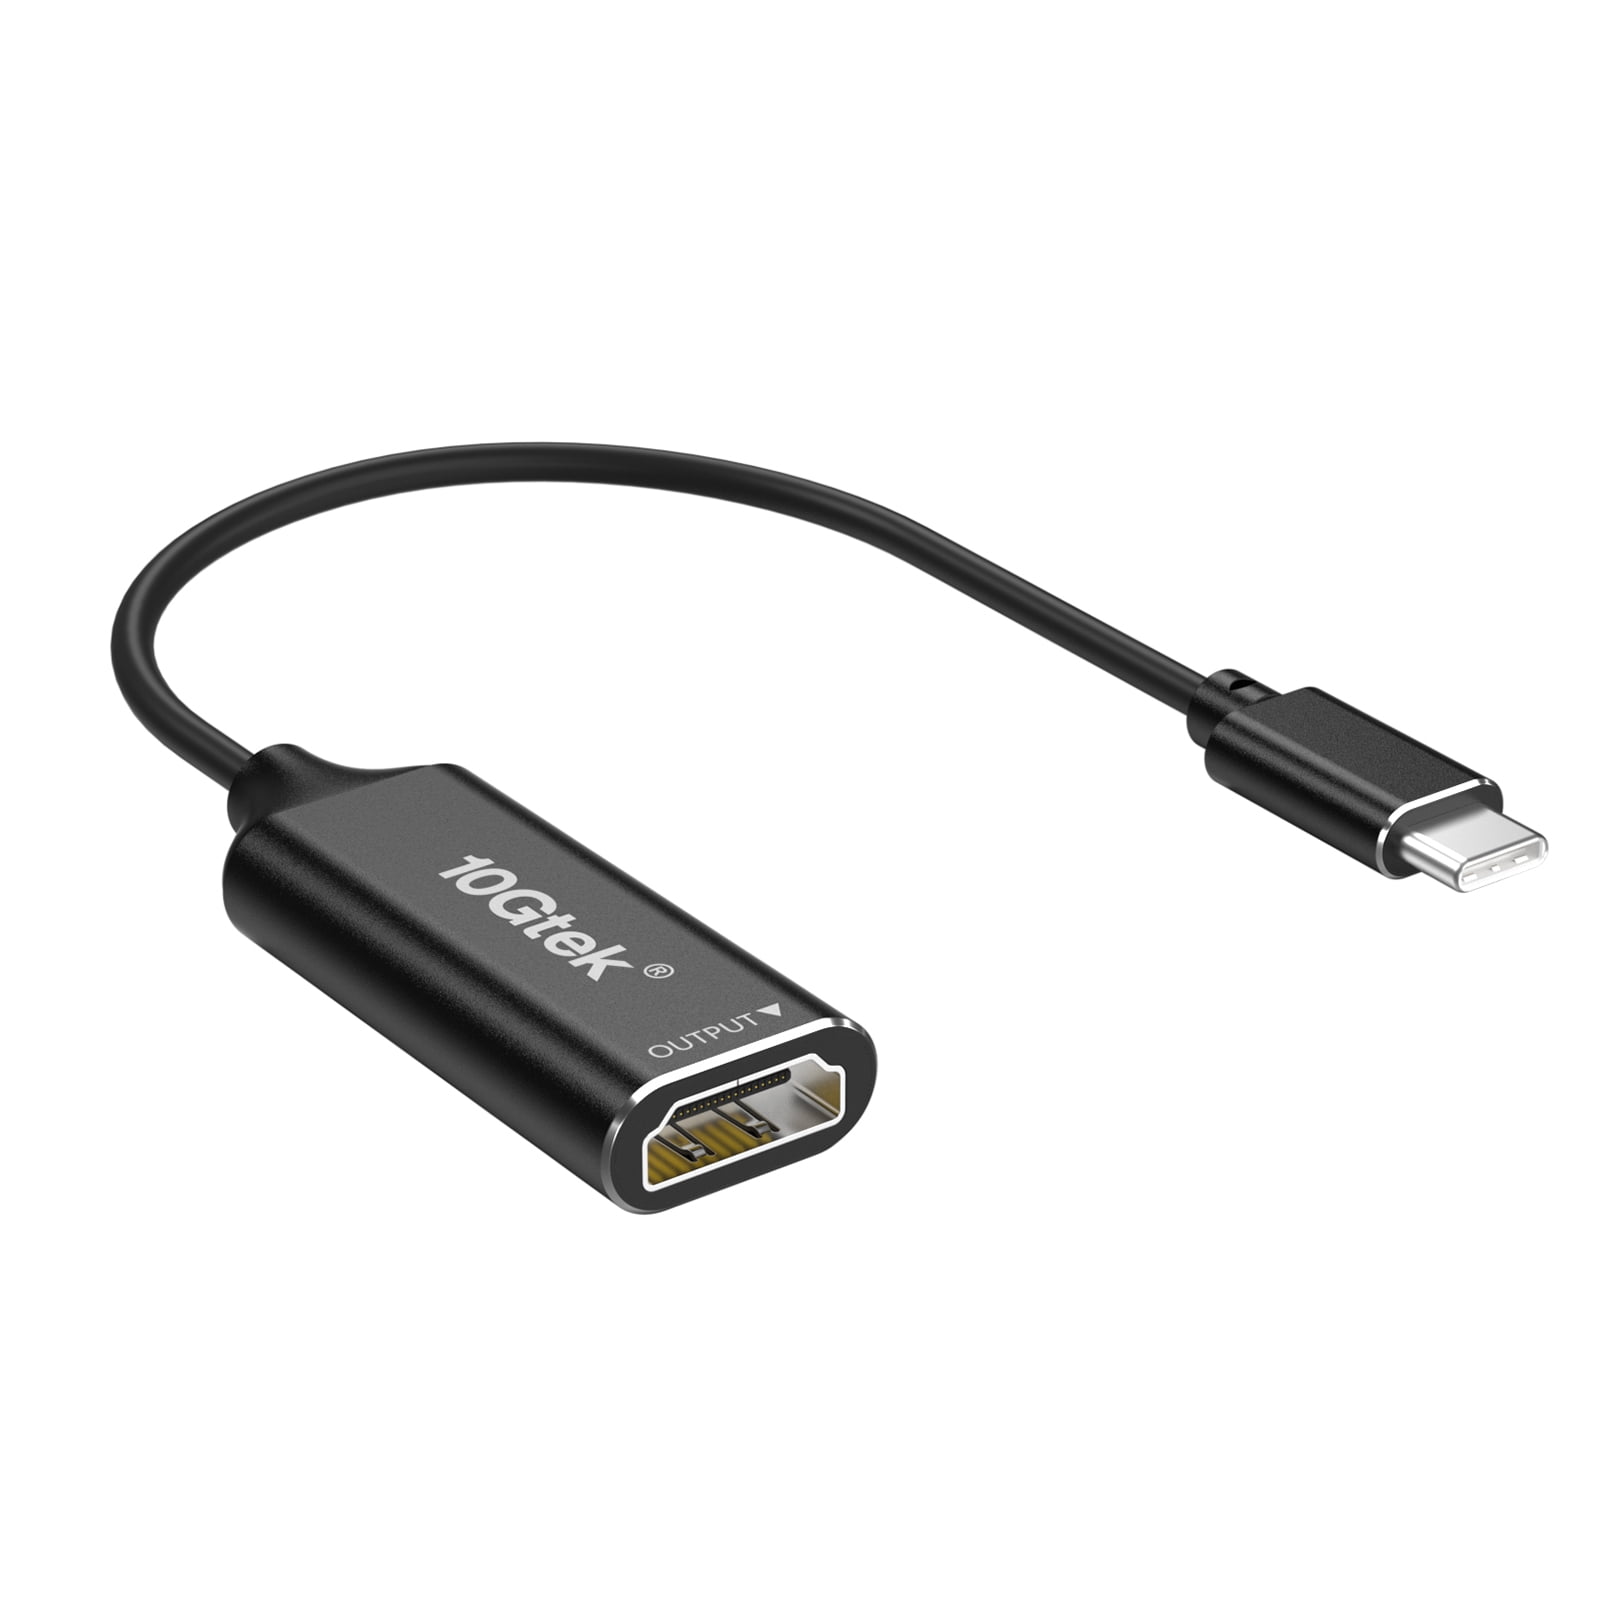 USB C to HDMI Adapter 4K Cable, Type-C to Adapter, Compatible for MacBook Pro/Air, iPad Pro, Samsung Galaxy, Dell XPS, PixelBook and More - Walmart.com